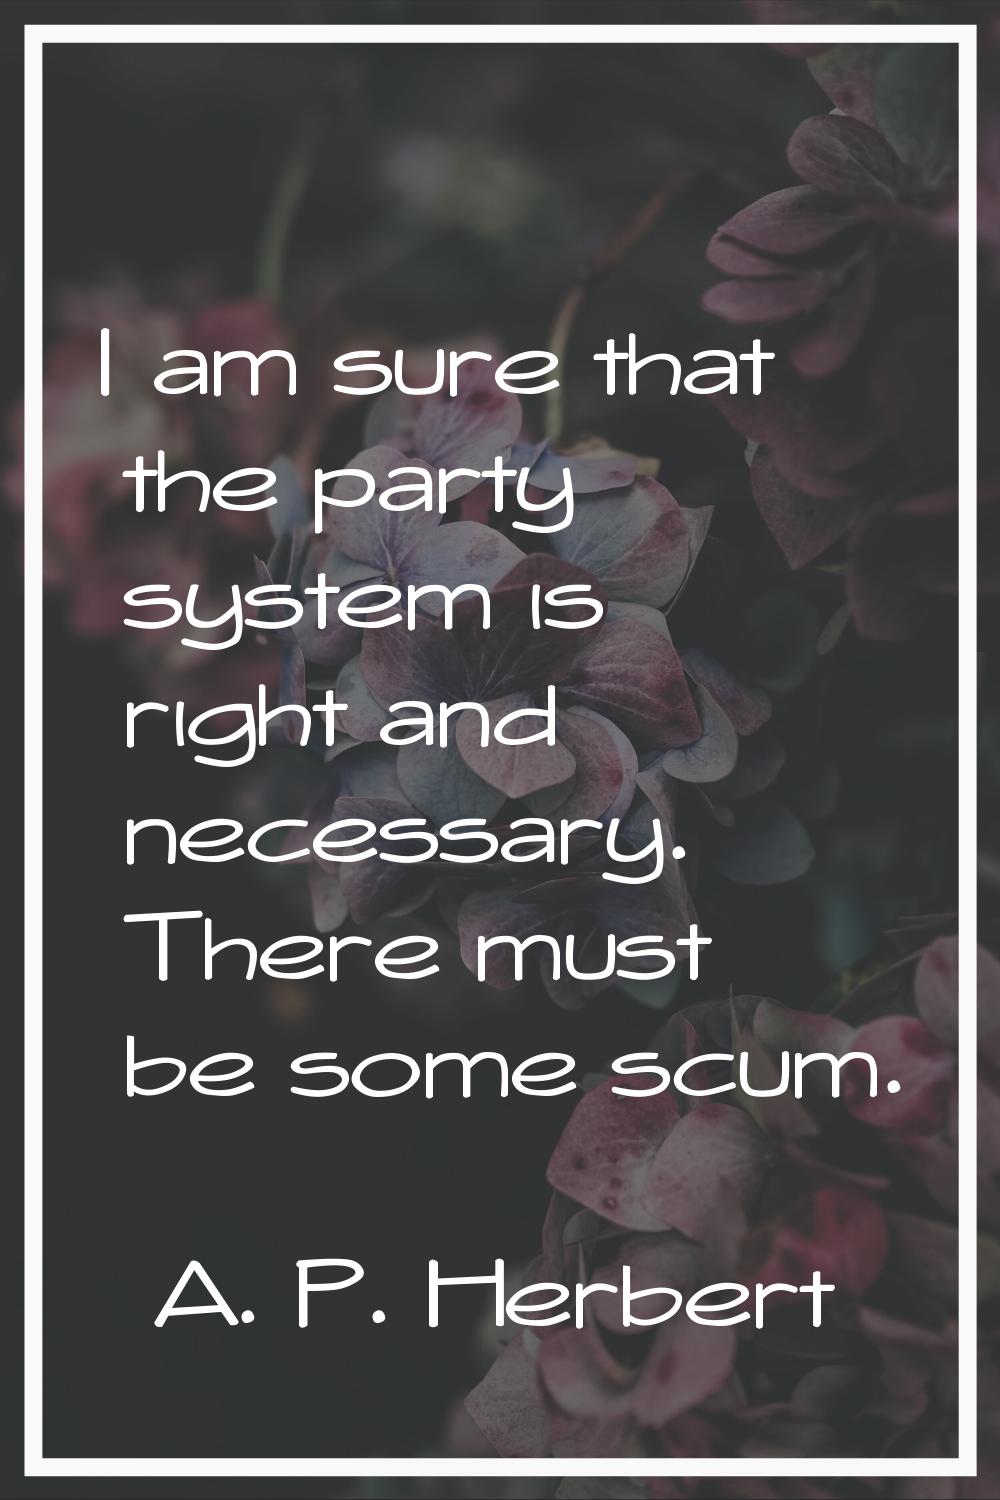 I am sure that the party system is right and necessary. There must be some scum.